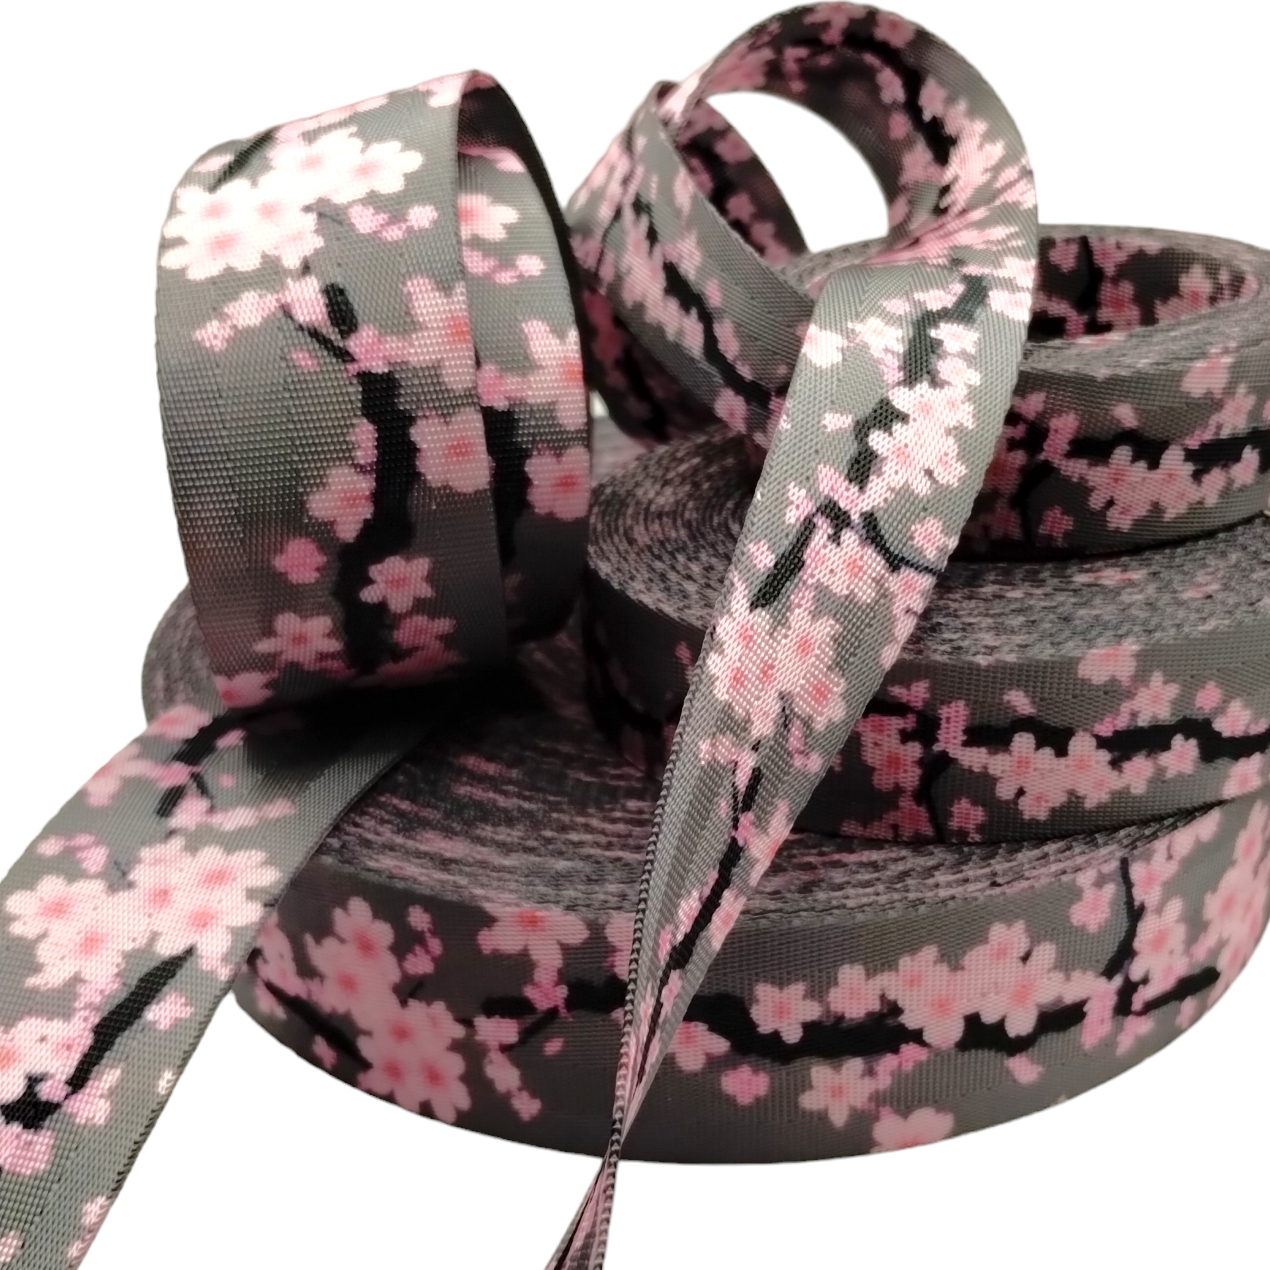 New Cherry Blossom Webbing - 2 sizes, sold by the meter Atelier Fiber Arts